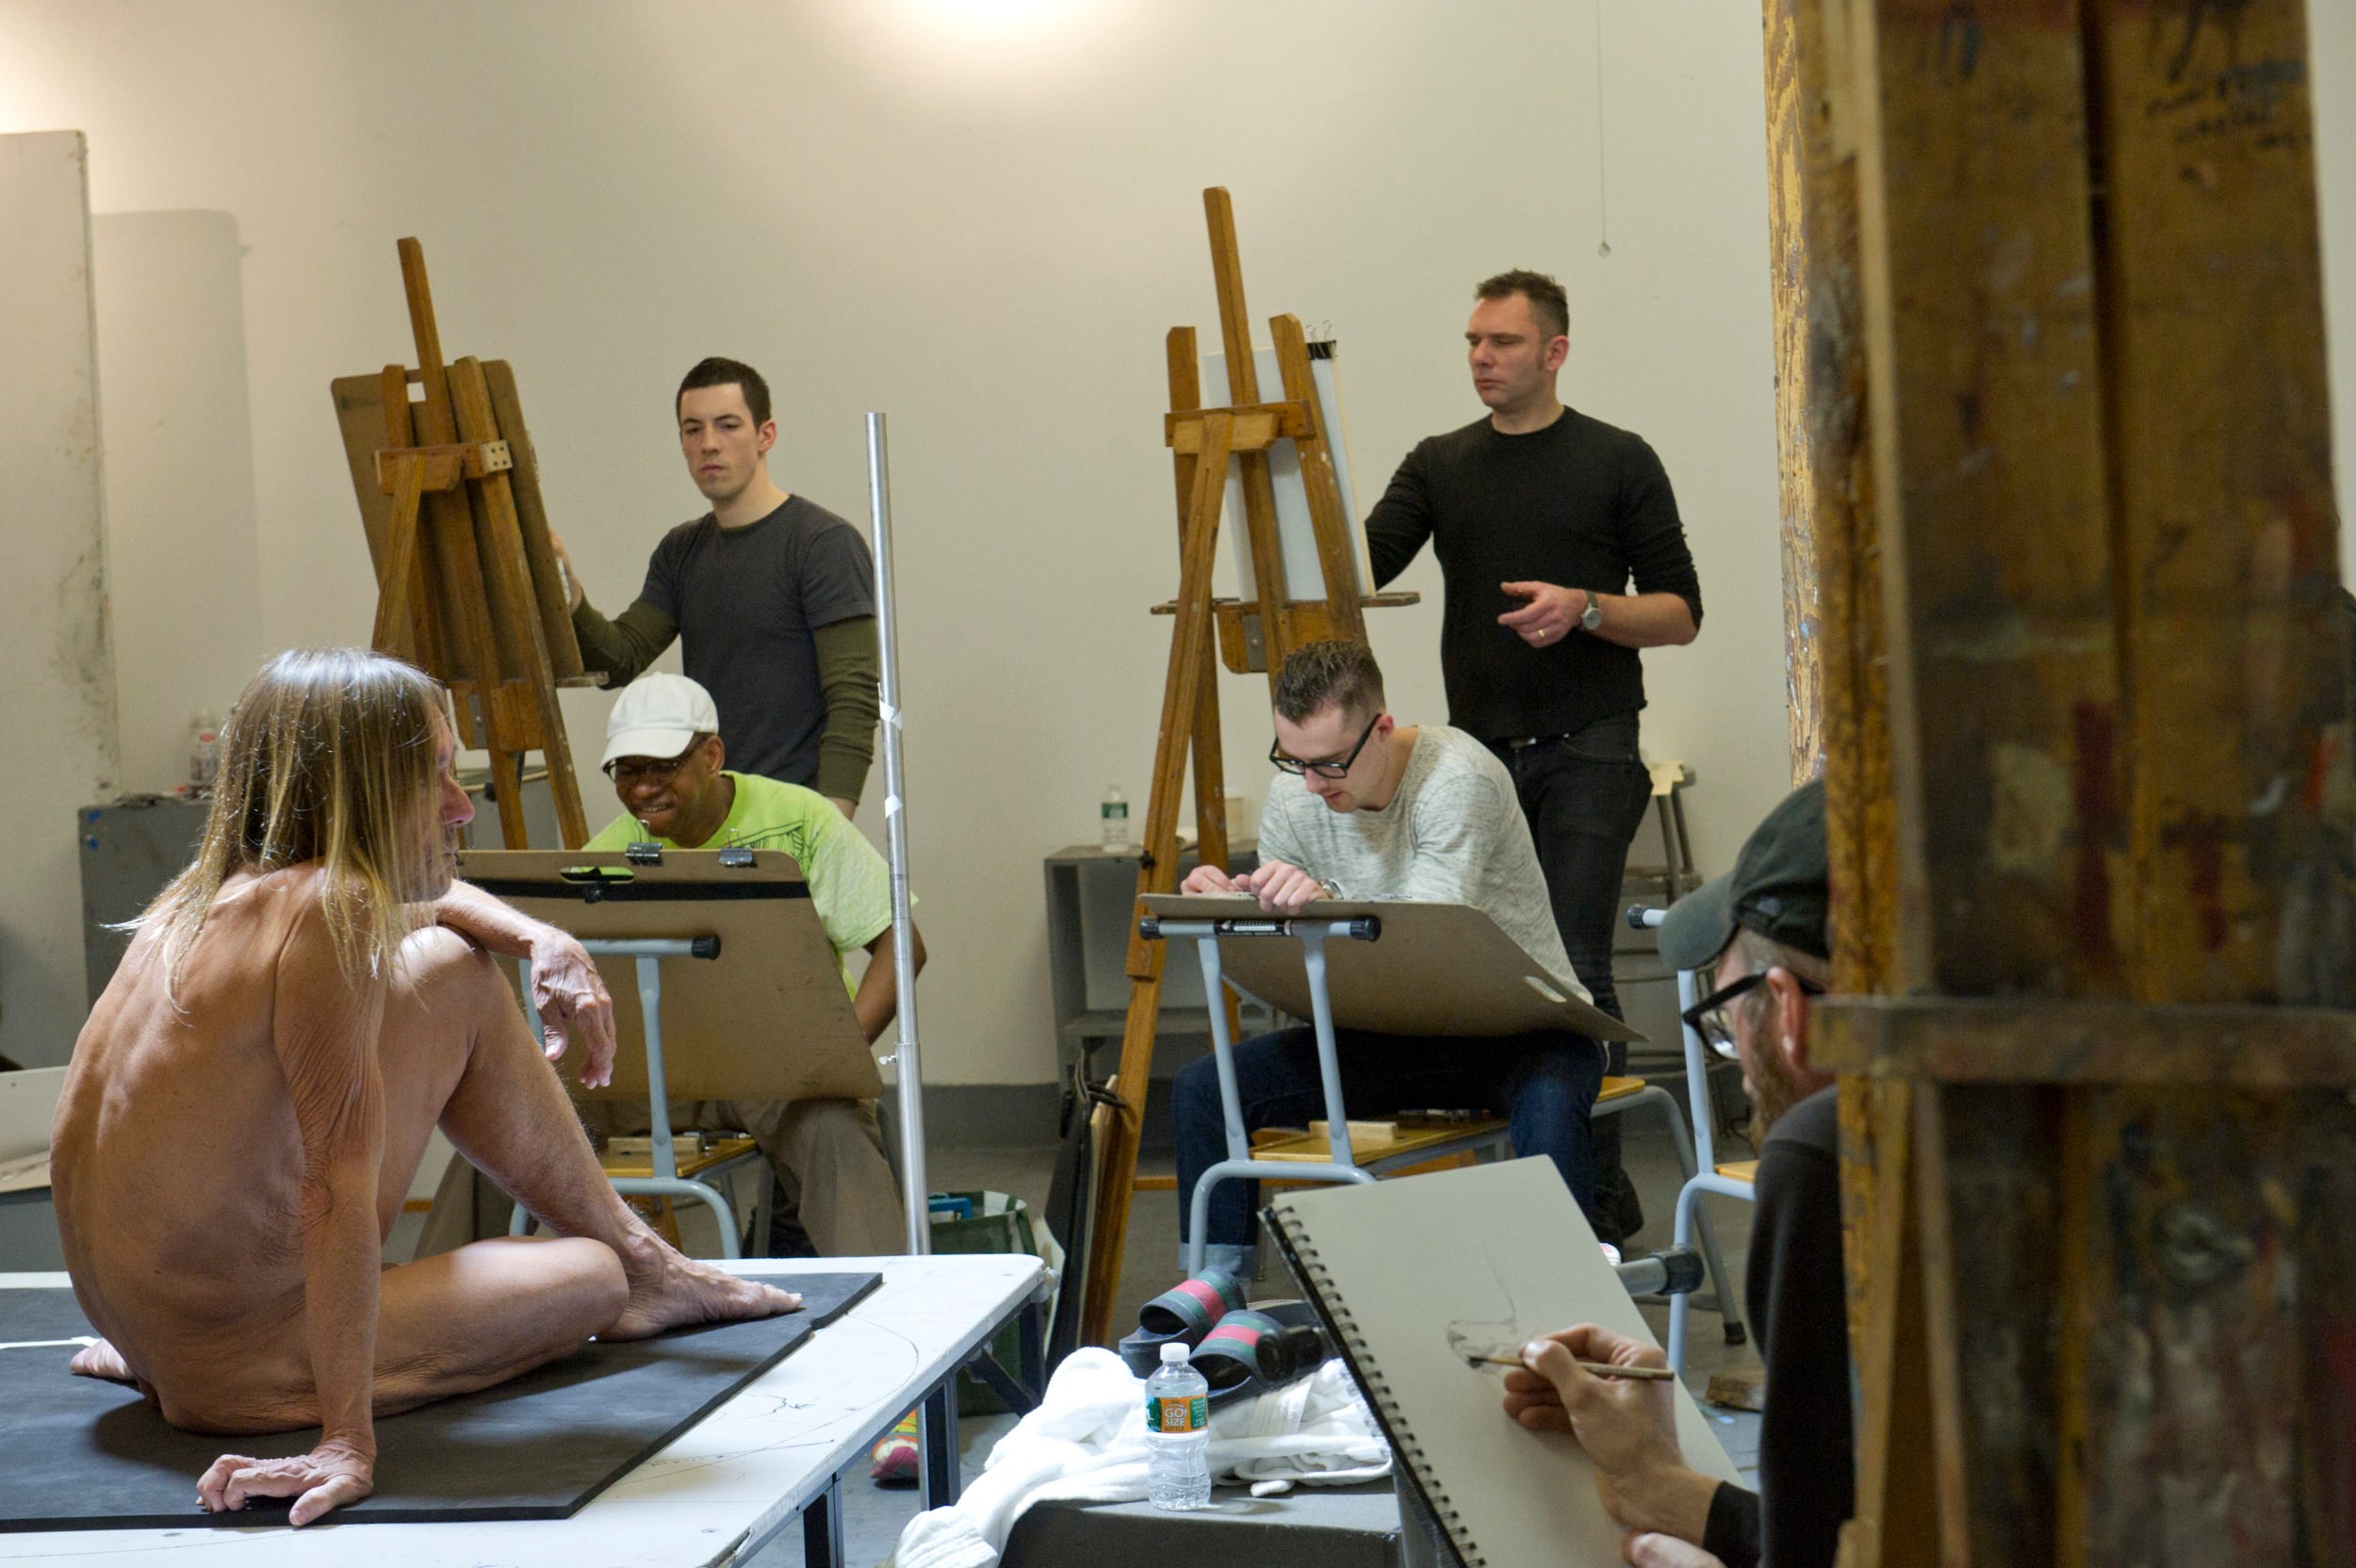 London’s Royal Academy Opens Its Historic Life Drawing Room to the